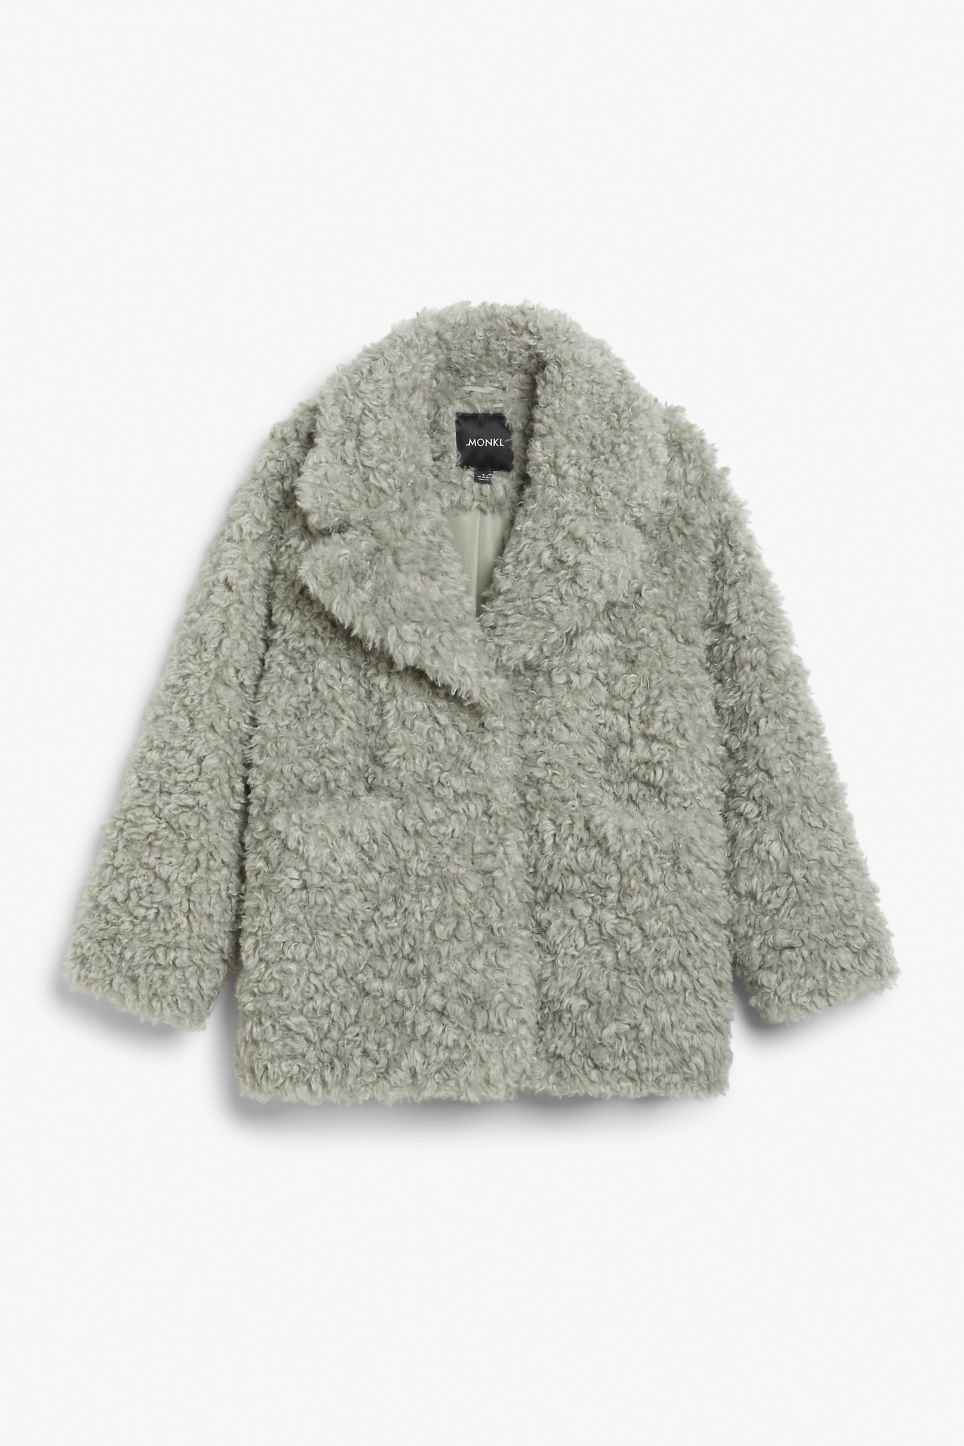 22 Best Faux Fur Coats And Jackets To Buy Now